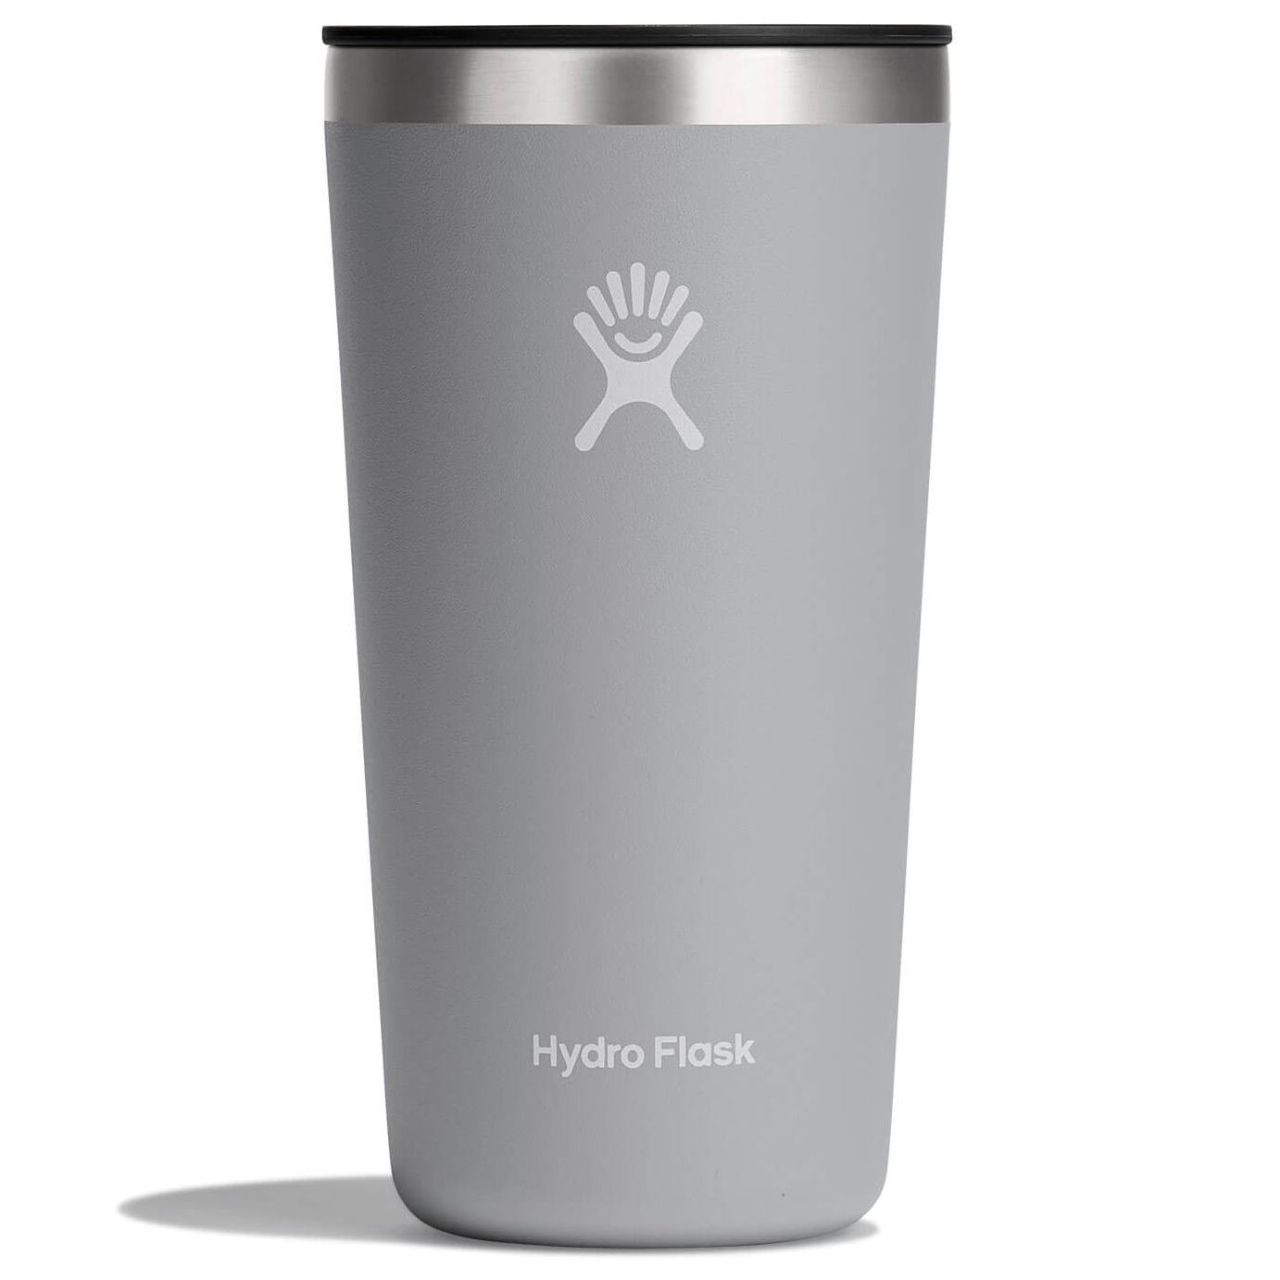 NEW 20 fl oz Hydro Flask Wide Mouth Double Wall Insulated Coffee Tumbler